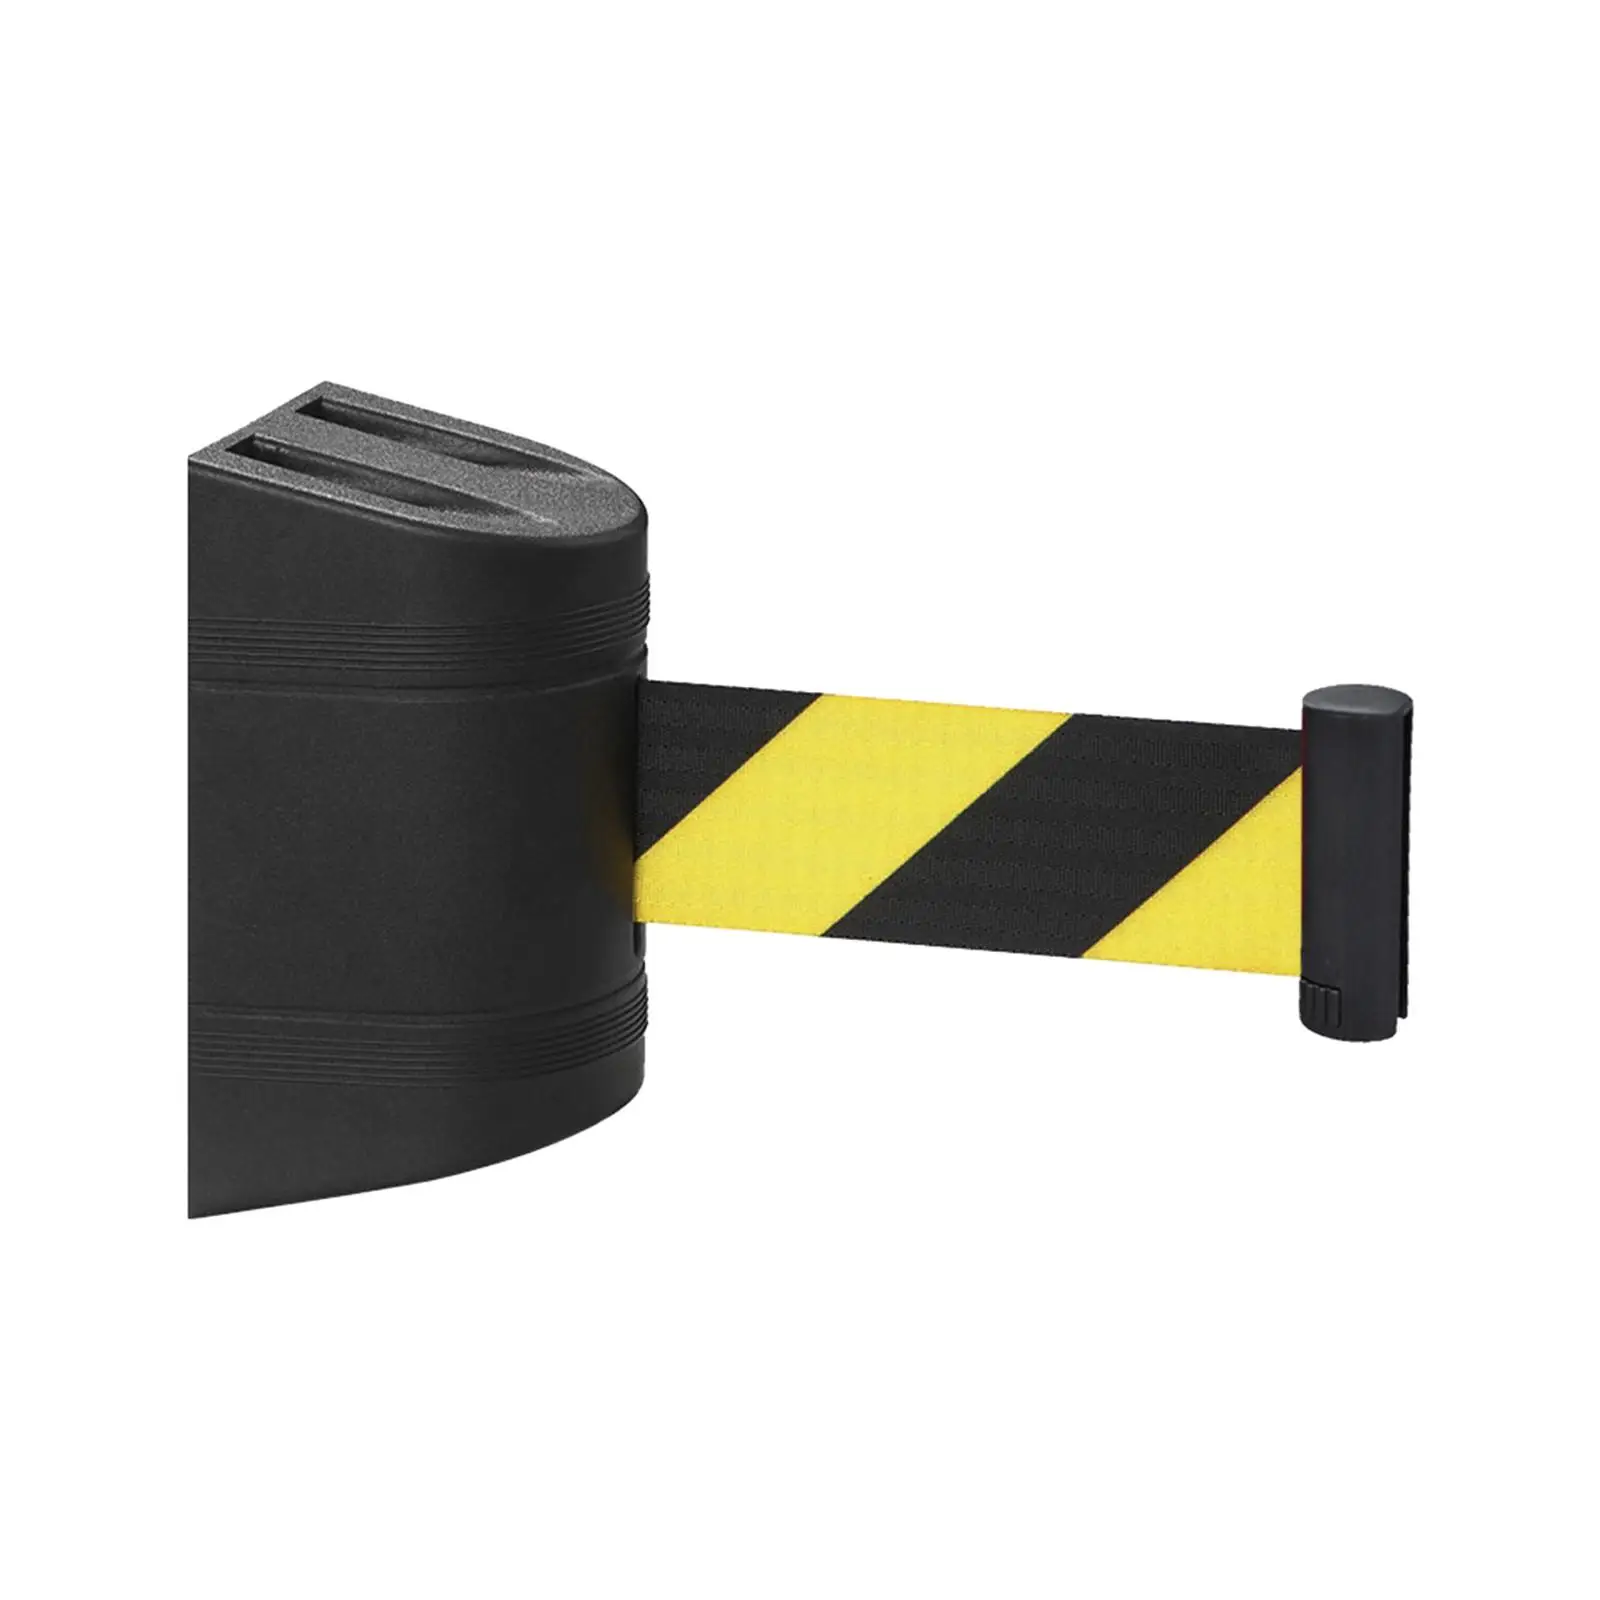 Crowd Control Wall Barrier Fixed Save Space Retractable Barrier Belt for Corridor Cash Register Sporting Events Stadiums Parades